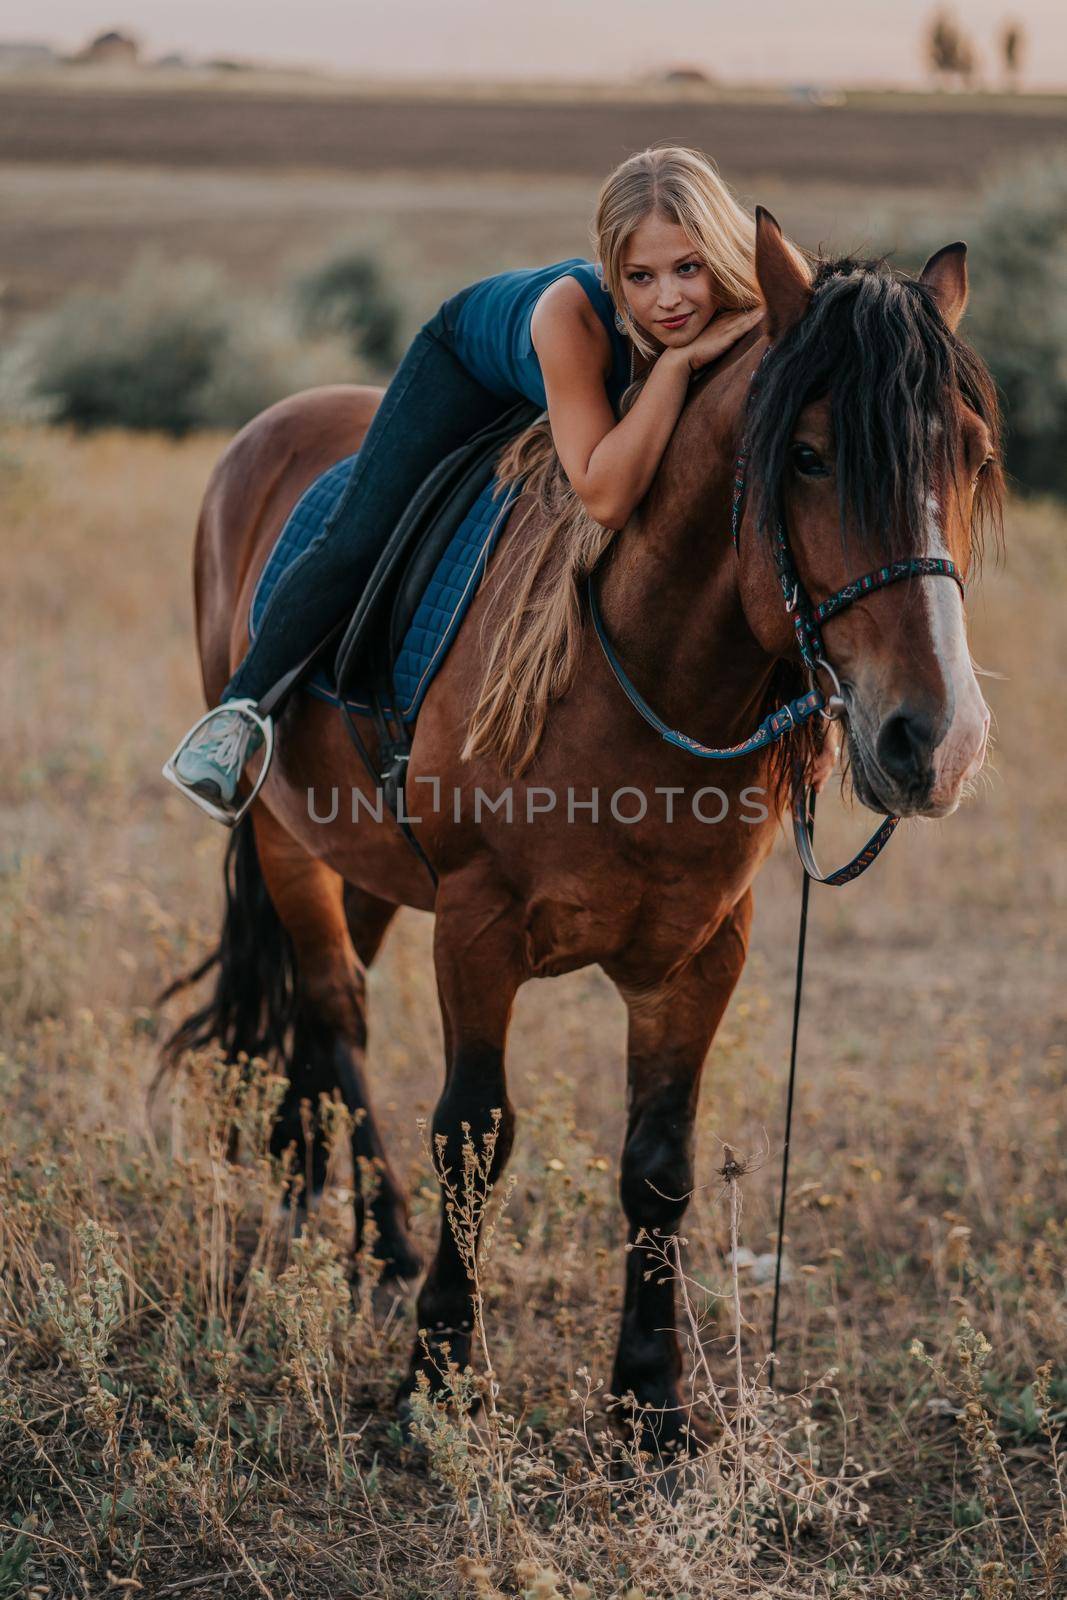 Pretty young girl sitting on horse on nature background. Concept of love, friendship, farm animals by kristina_kokhanova